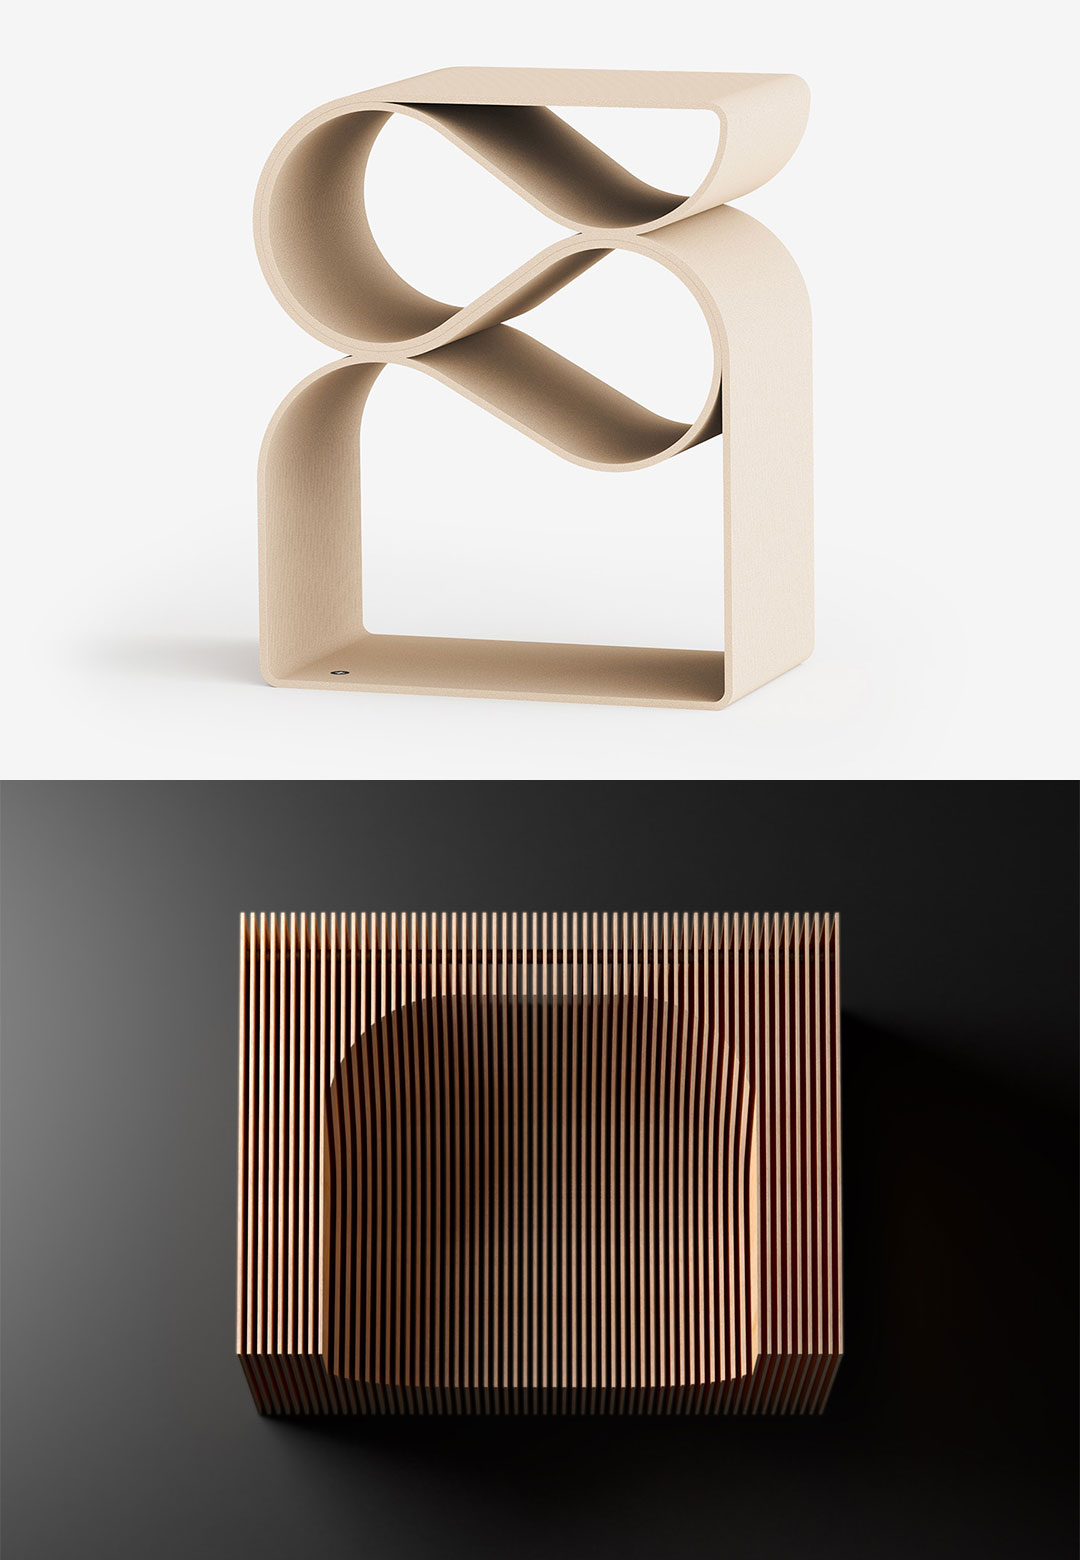 Deniz Aktay's experiments with geometric forms and wavy lines